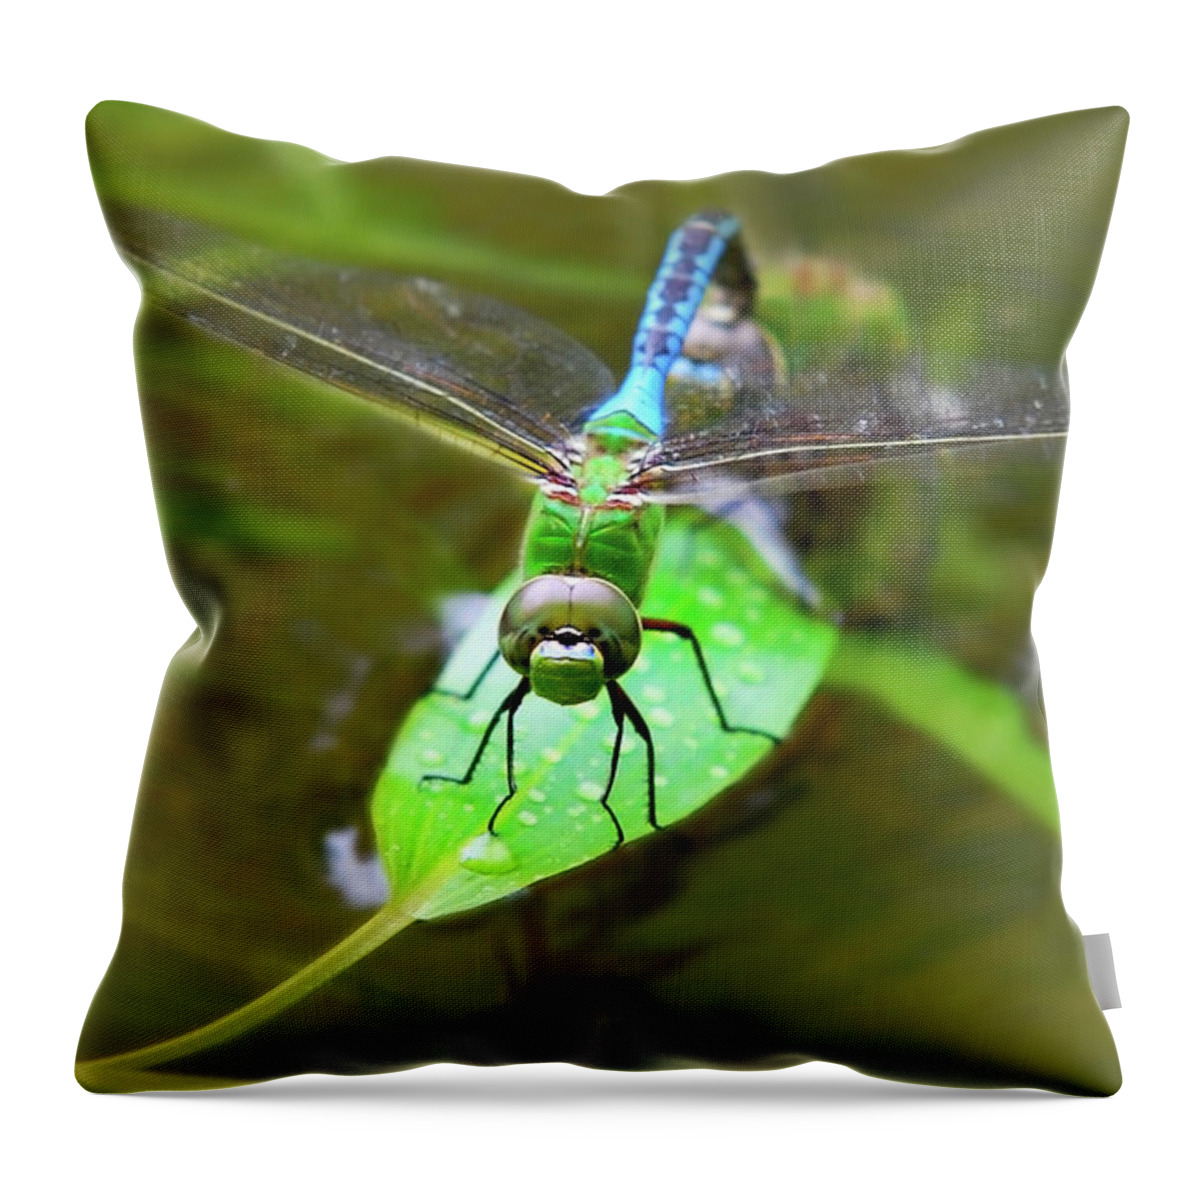 Dragonfly Throw Pillow featuring the photograph Green Darner Dragonfly by Christina Rollo